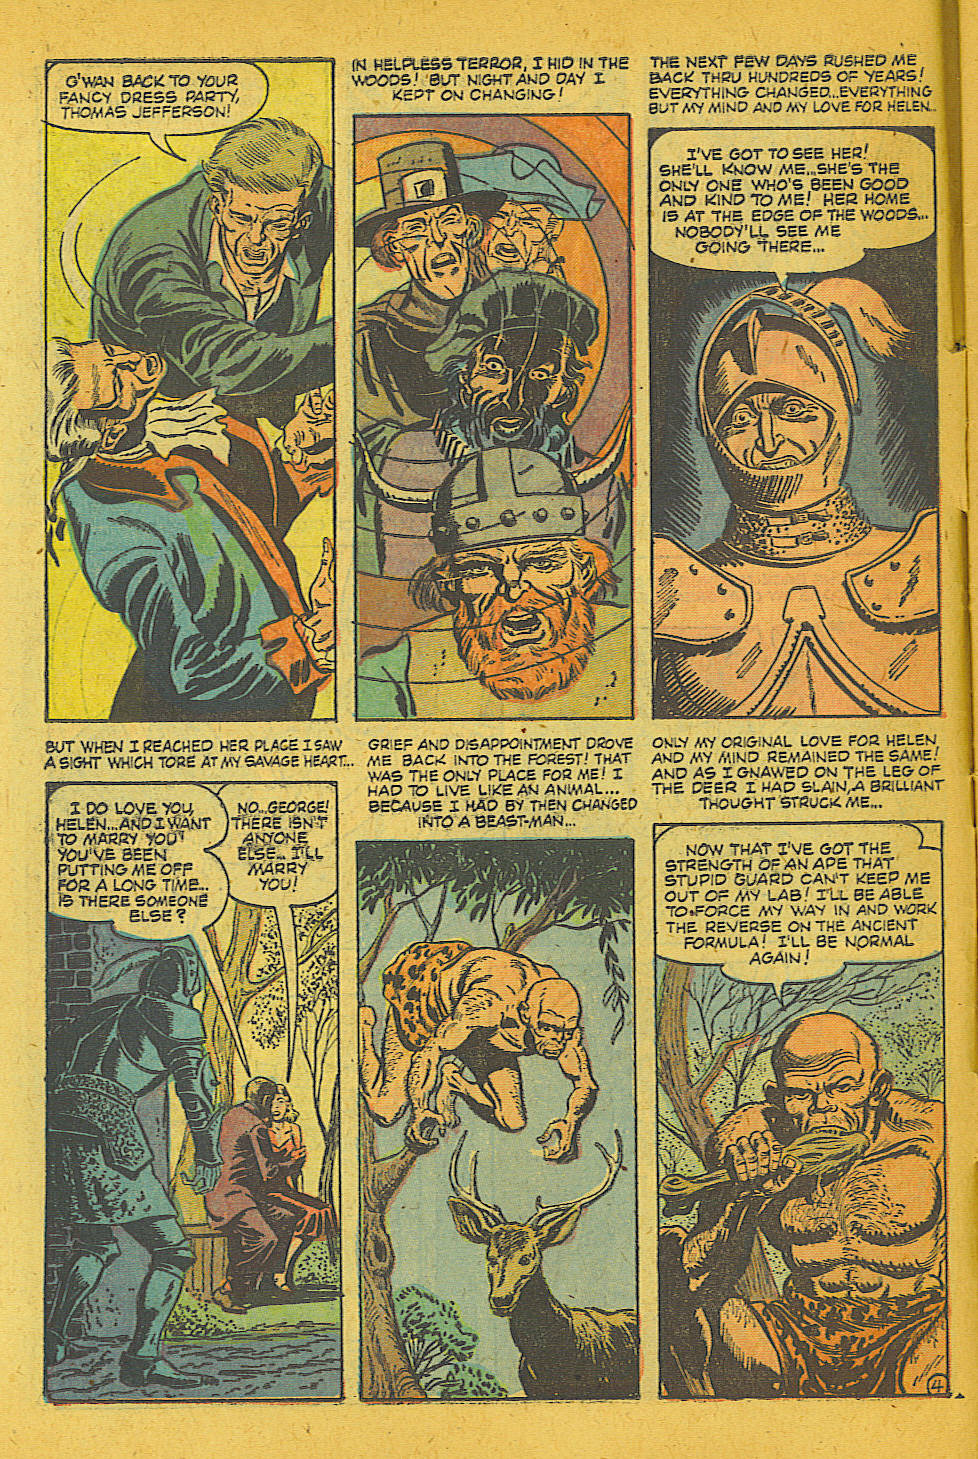 Marvel Tales (1949) 111 Page 4